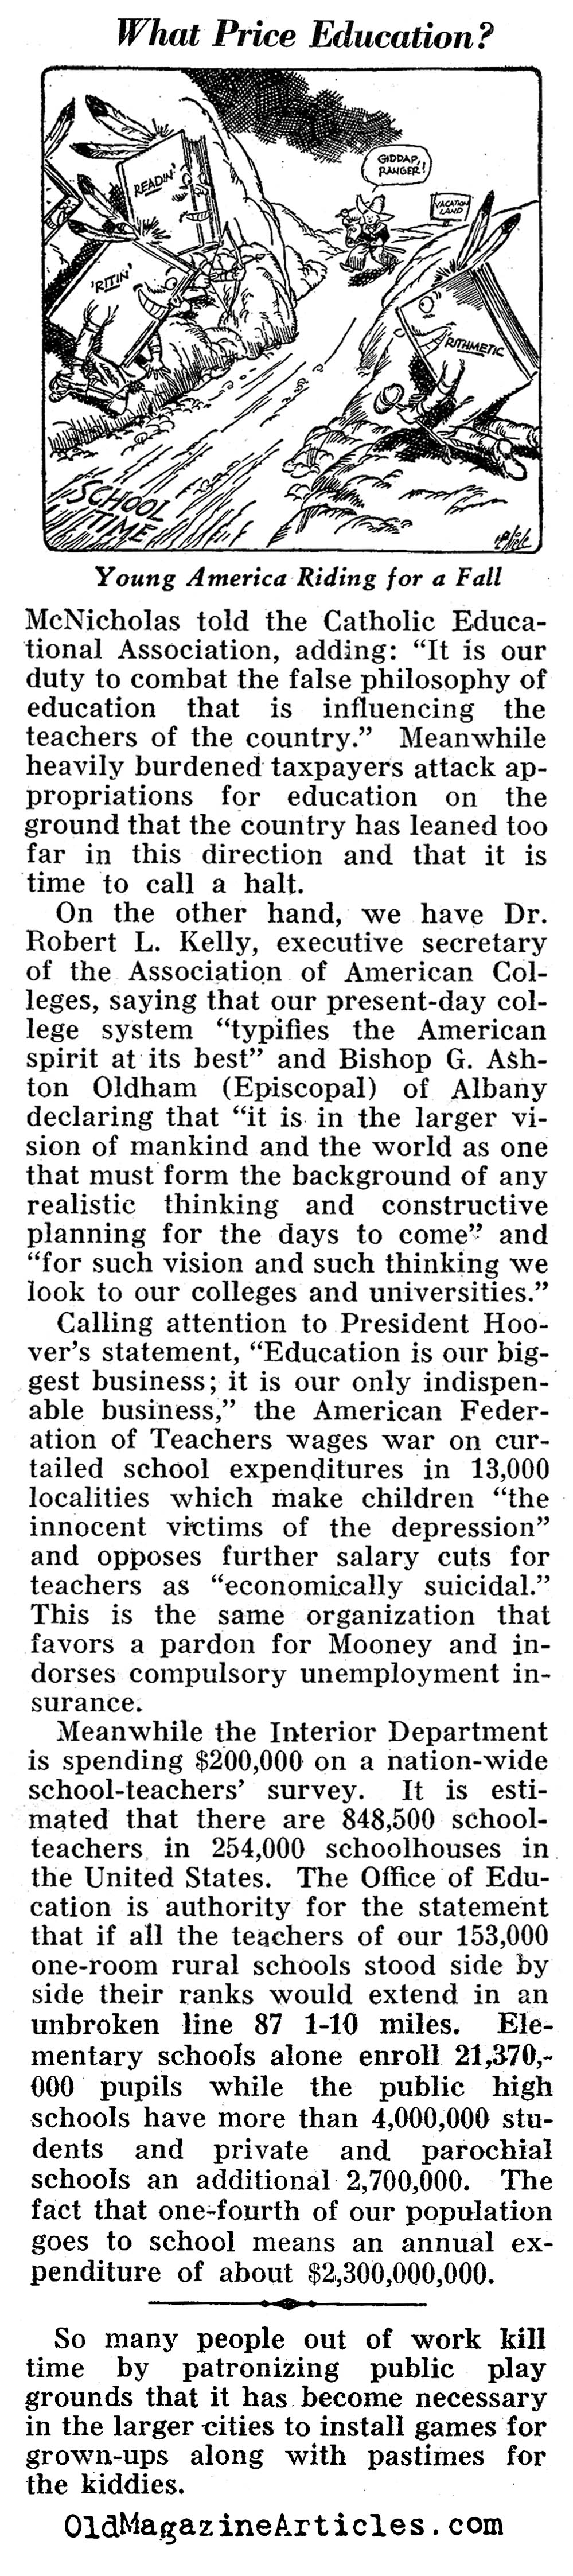 Are College Degrees Needed In Such A Bad Economy? (Pathfinder Magazine, 1932)